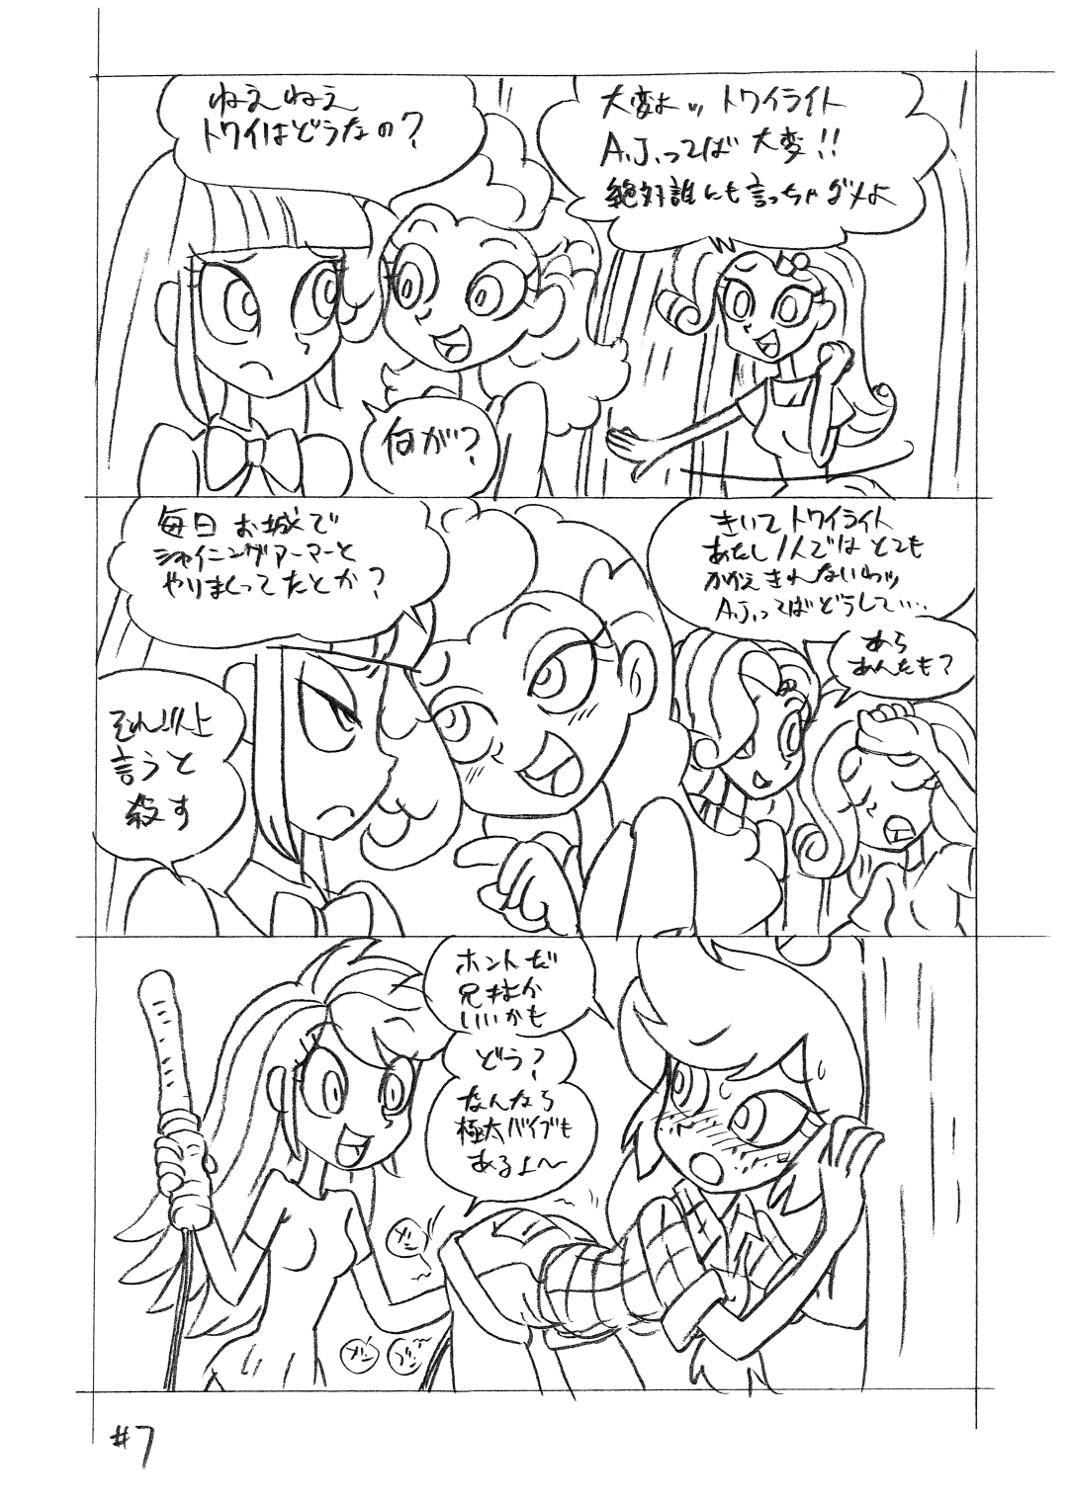 Brazzers Psychosomatic Counterfeit EX- A.J. in E.G. Style - My little pony friendship is magic Classy - Page 6